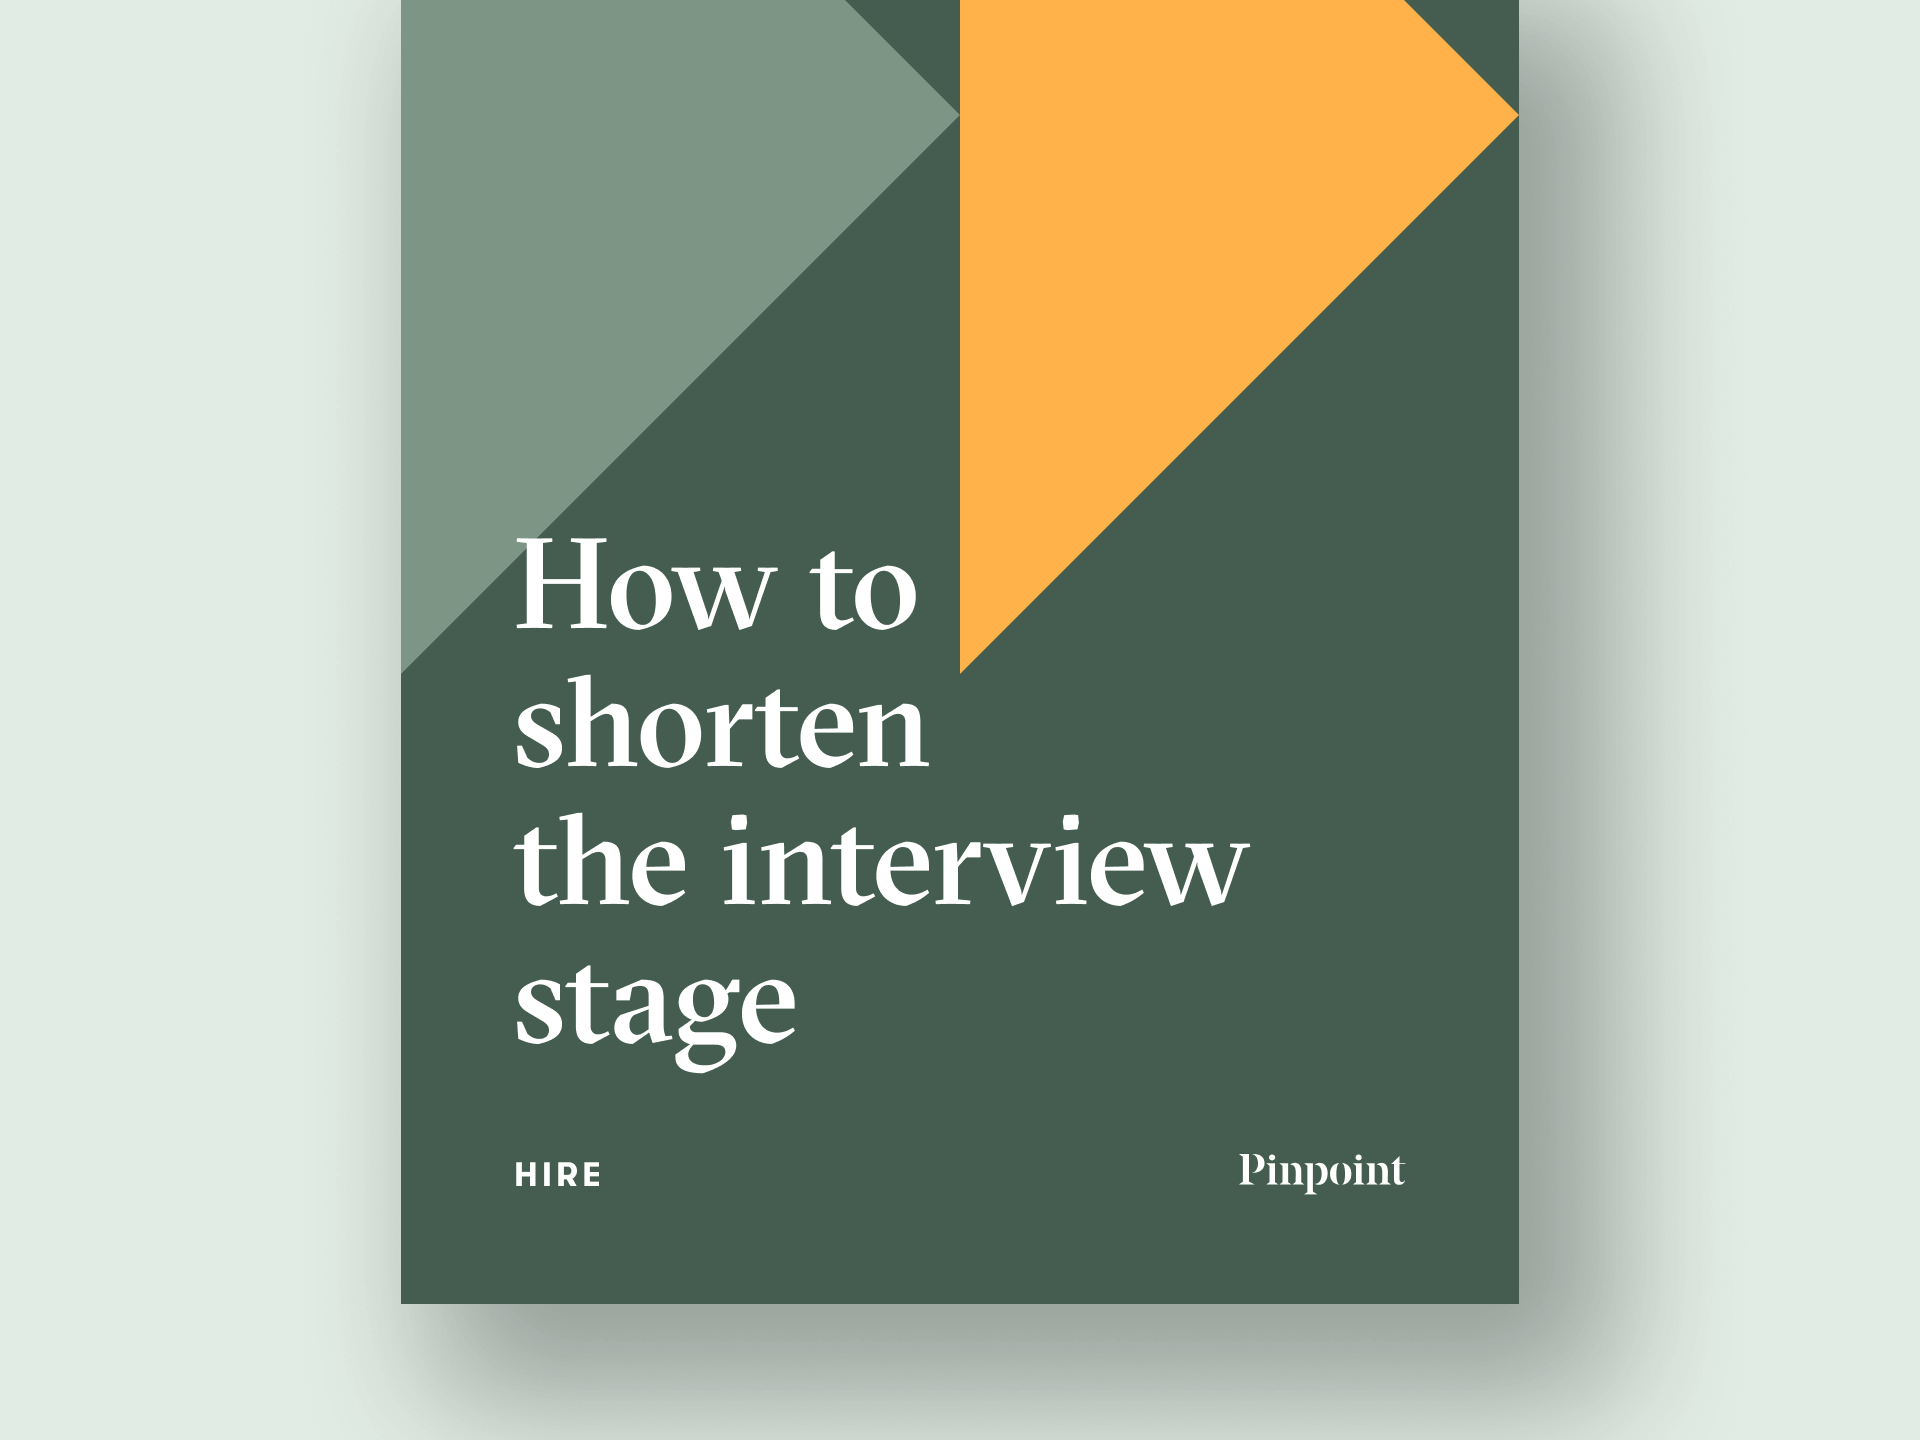 How to shorten the interview stage